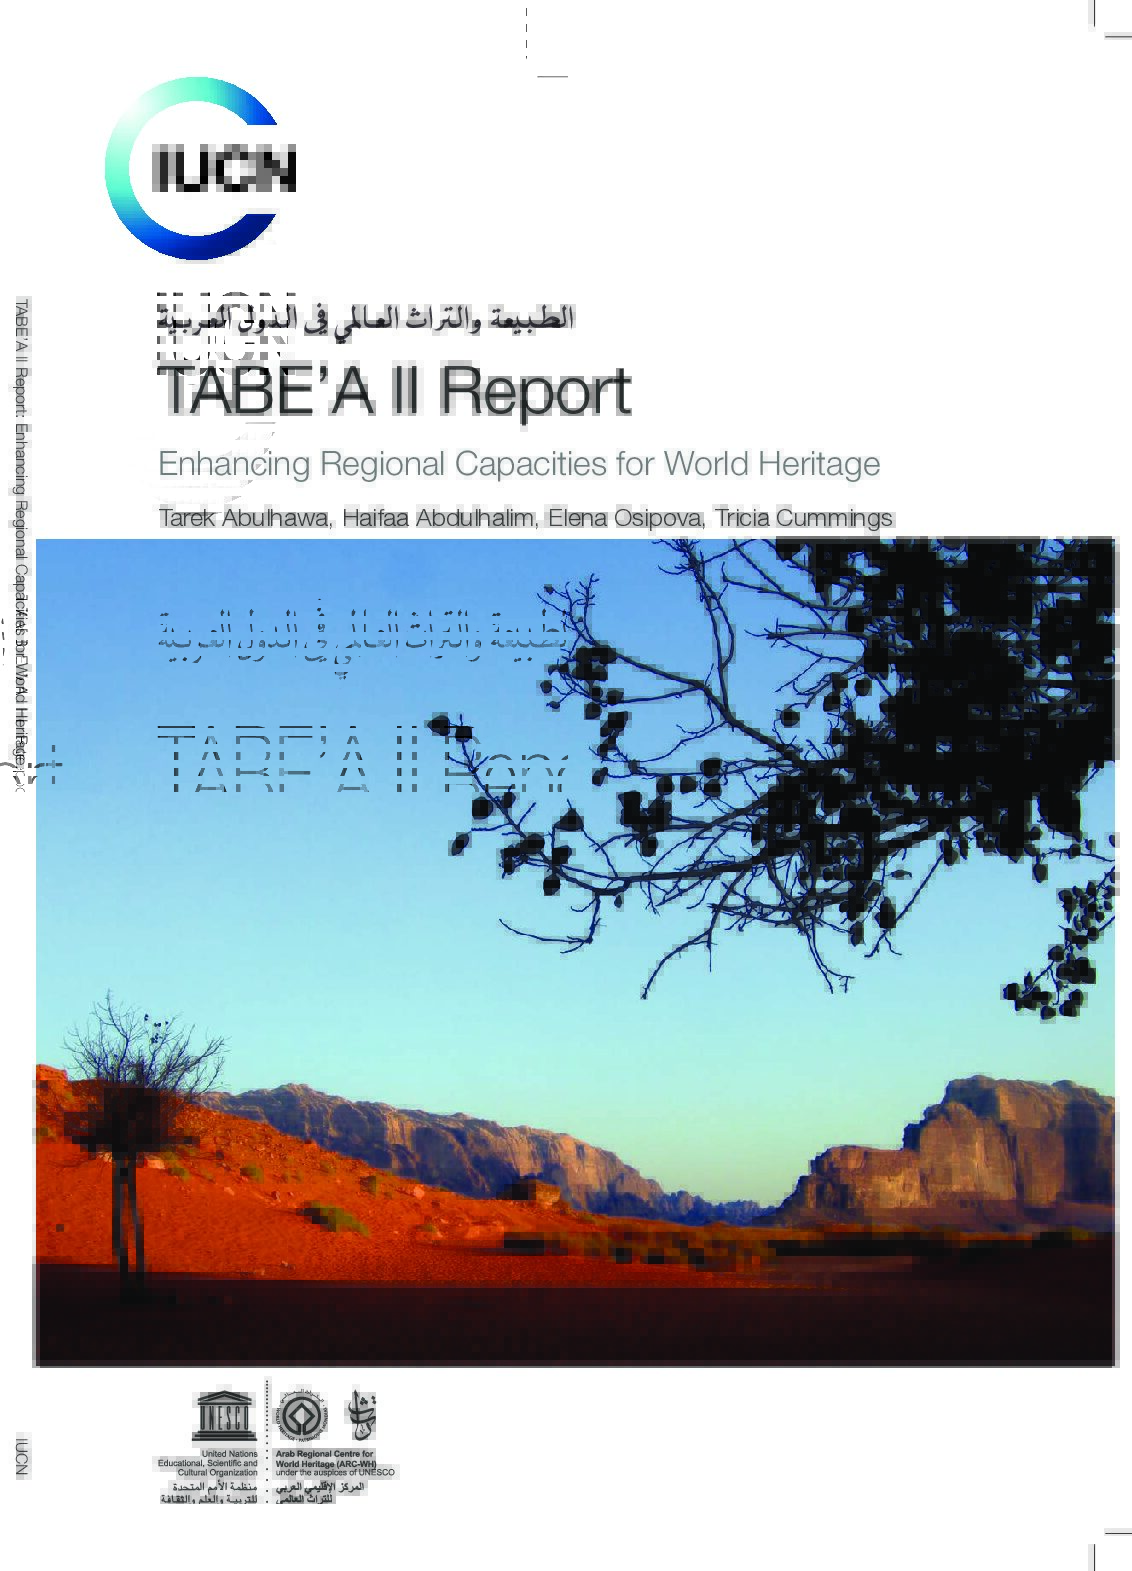 Tabe’a II Report – Enhancing Regional Capacities for World Heritage